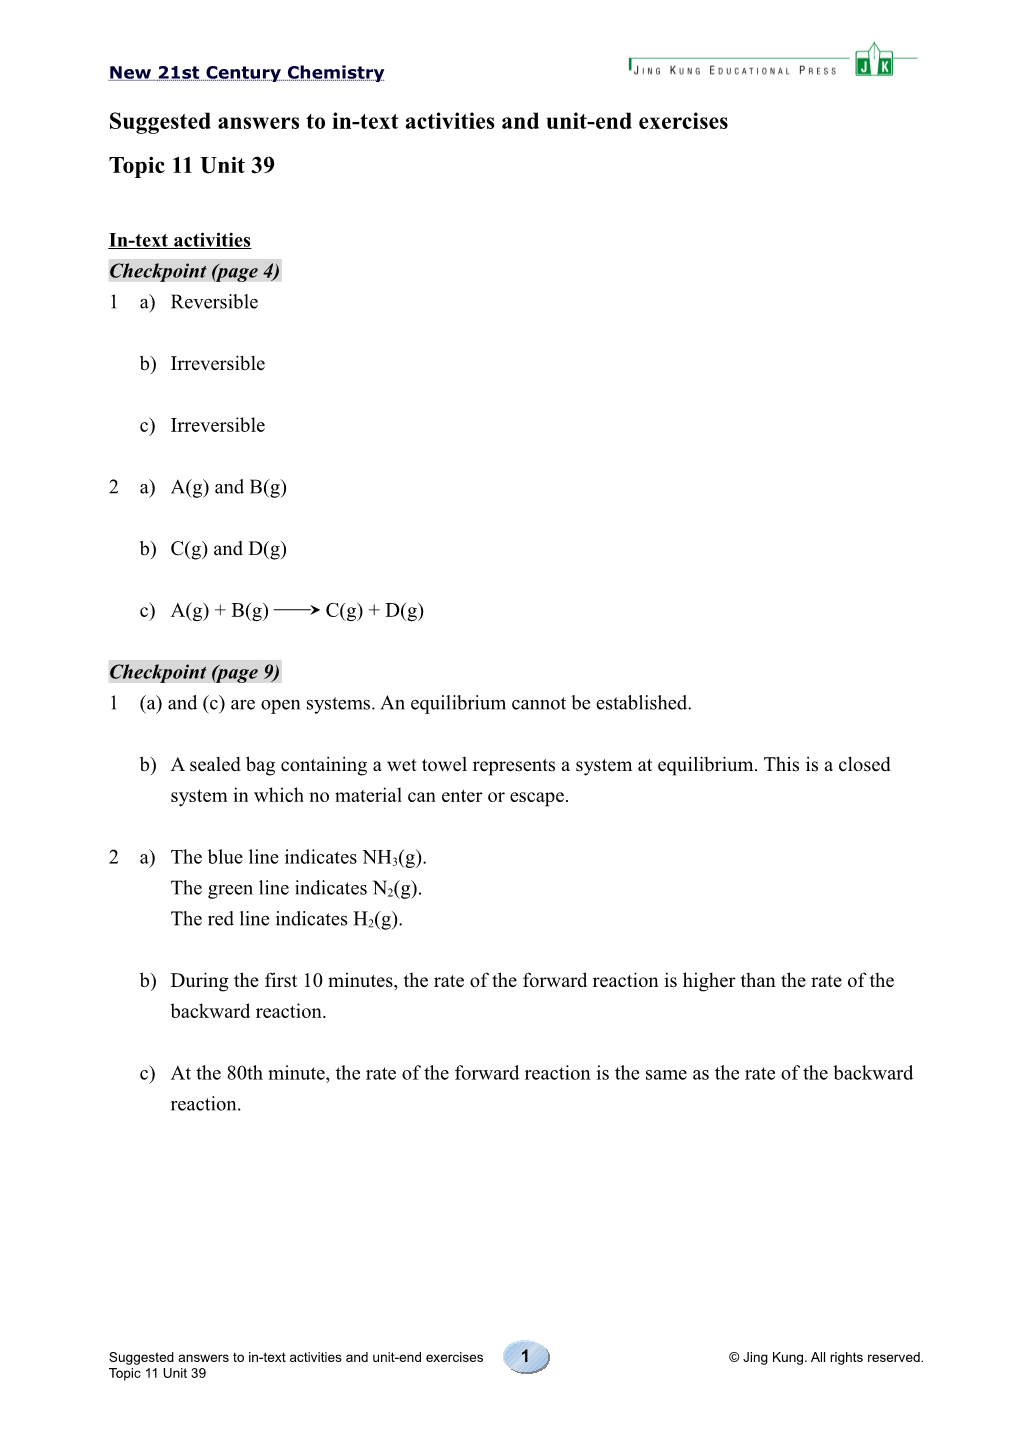 Suggested Answers to In-Text Activities and Exercises s2